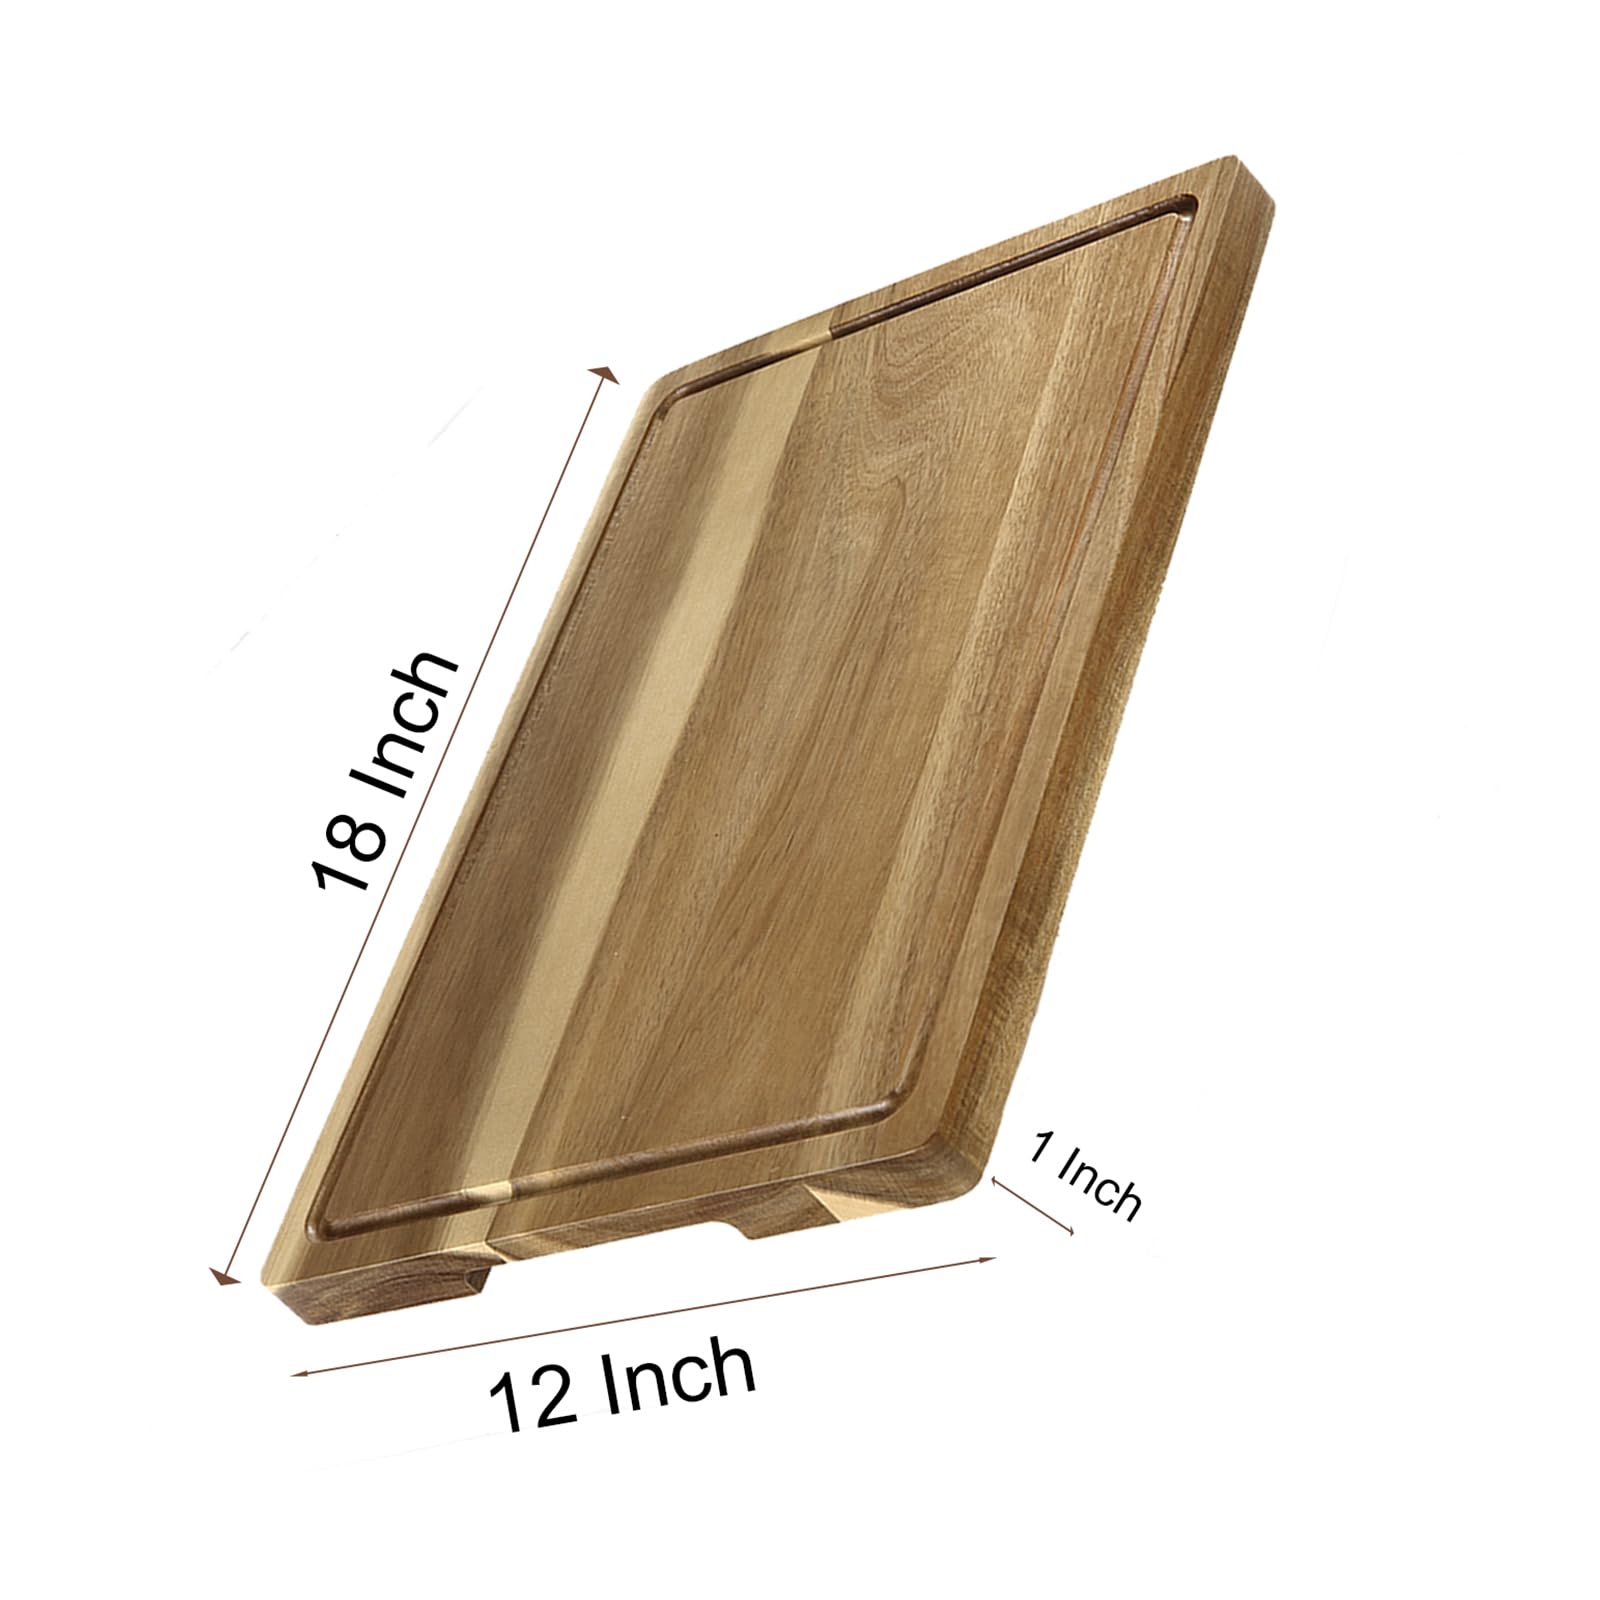 Cutting Board, 18x12 Large Acacia Wooden Cutting Board for Kitchen, Edge Grain Wood Chopping Board with Juice Groove and Handles, Pre-Oiled Carving Tray for Meat & Cheese